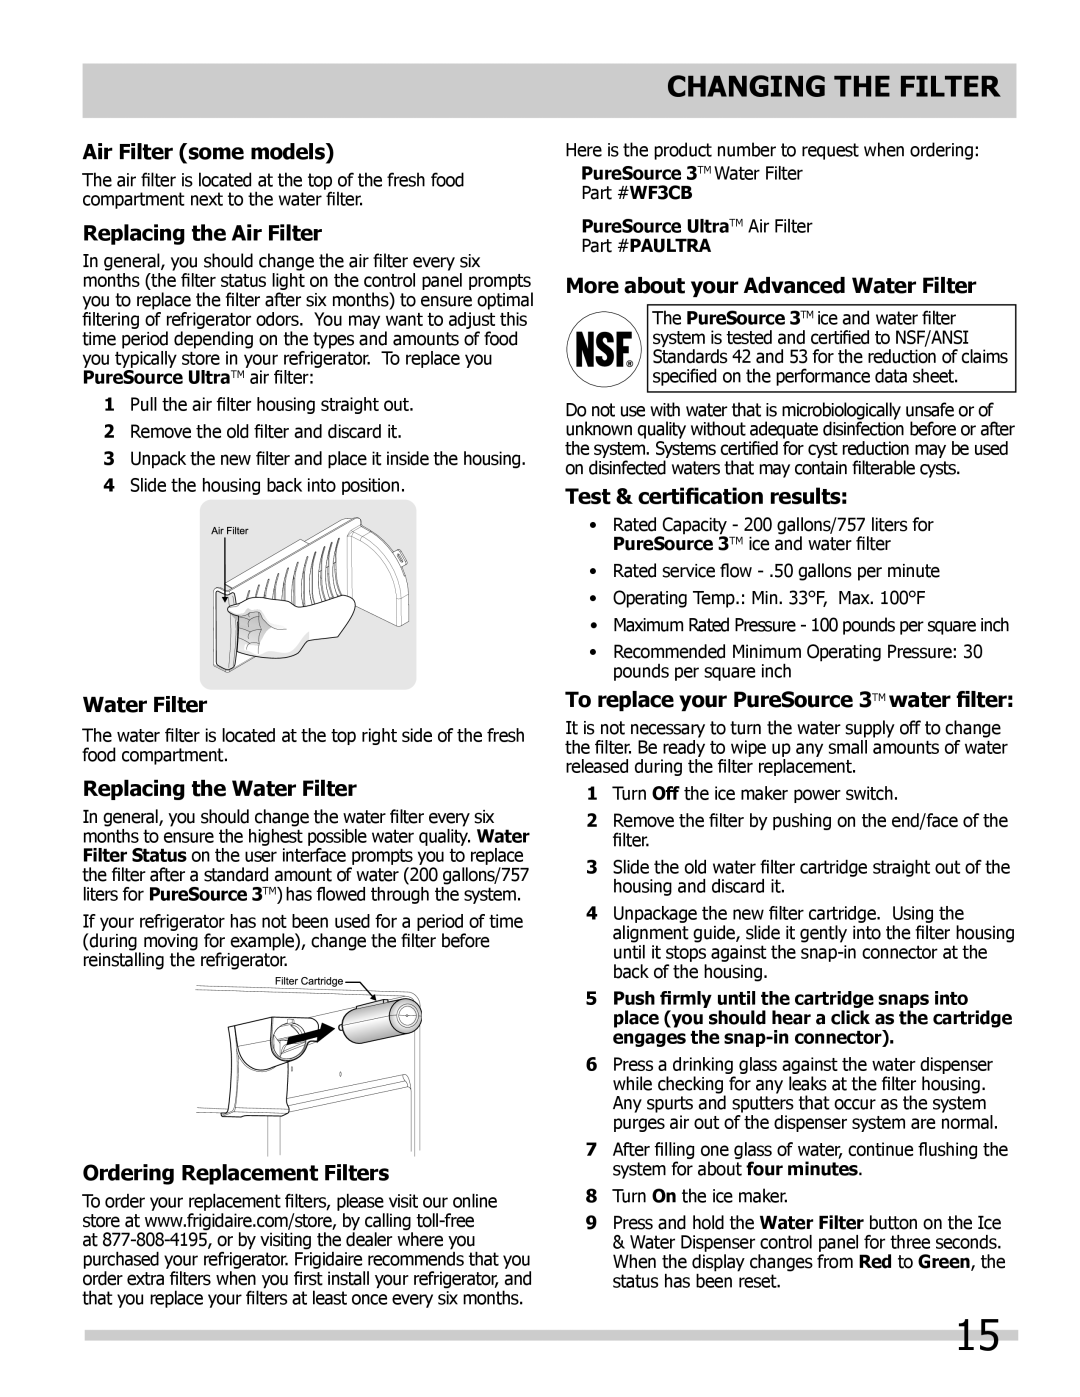 Frigidaire 242111900 manual Changing The Filter, Air Filter some models, Replacing the Air Filter, Water Filter 